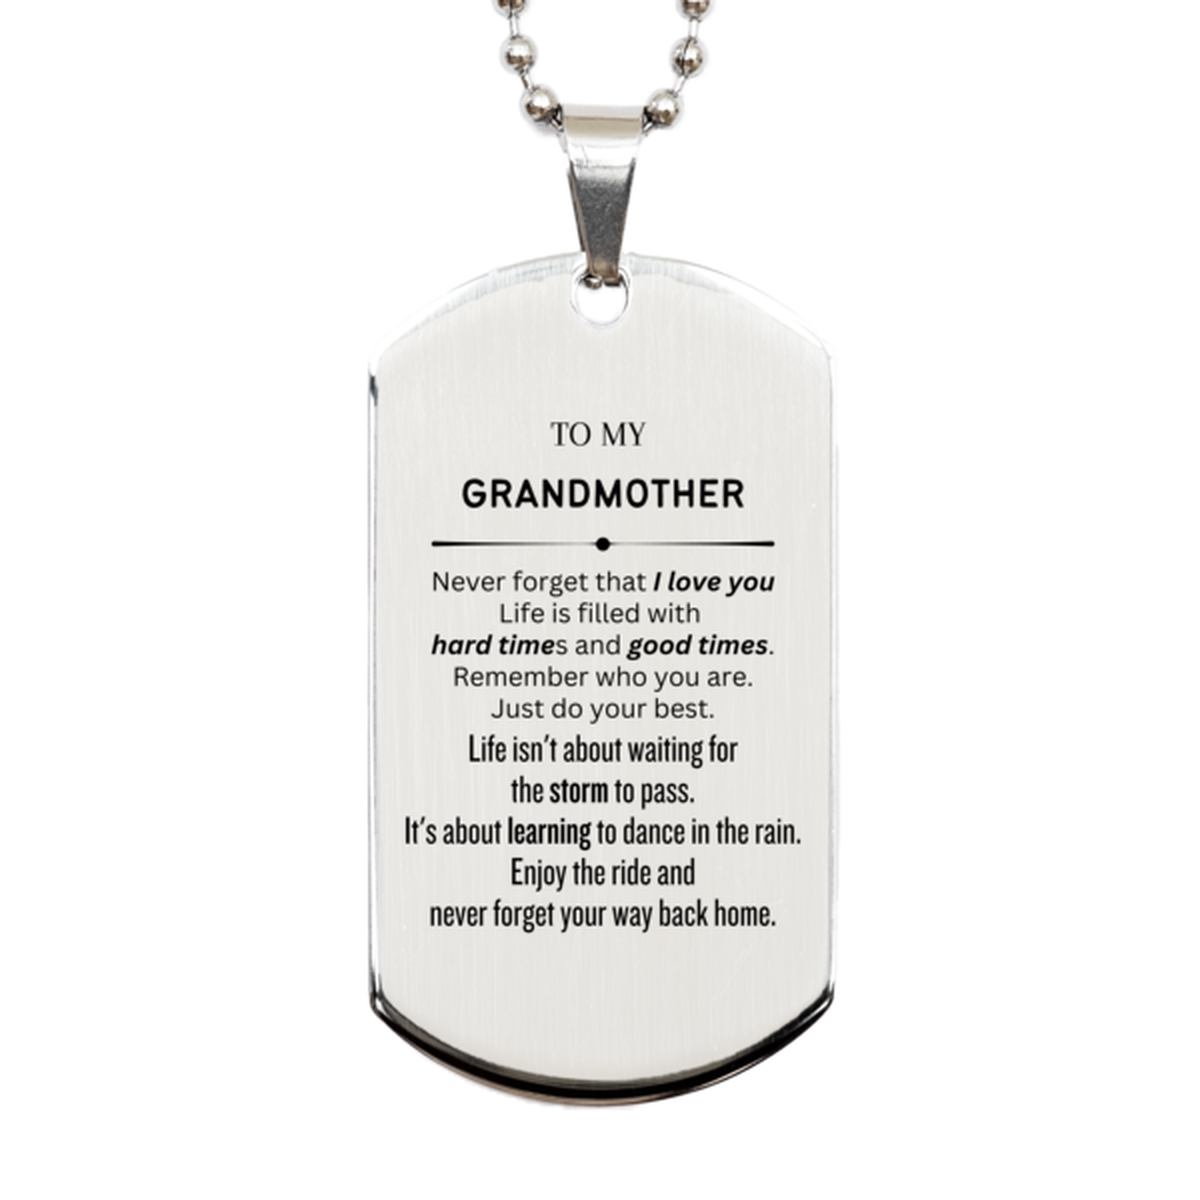 Christmas Grandmother Silver Dog Tag Gifts, To My Grandmother Birthday Thank You Gifts For Grandmother, Graduation Unique Gifts For Grandmother To My Grandmother Never forget that I love you life is filled with hard times and good times. Remember who you